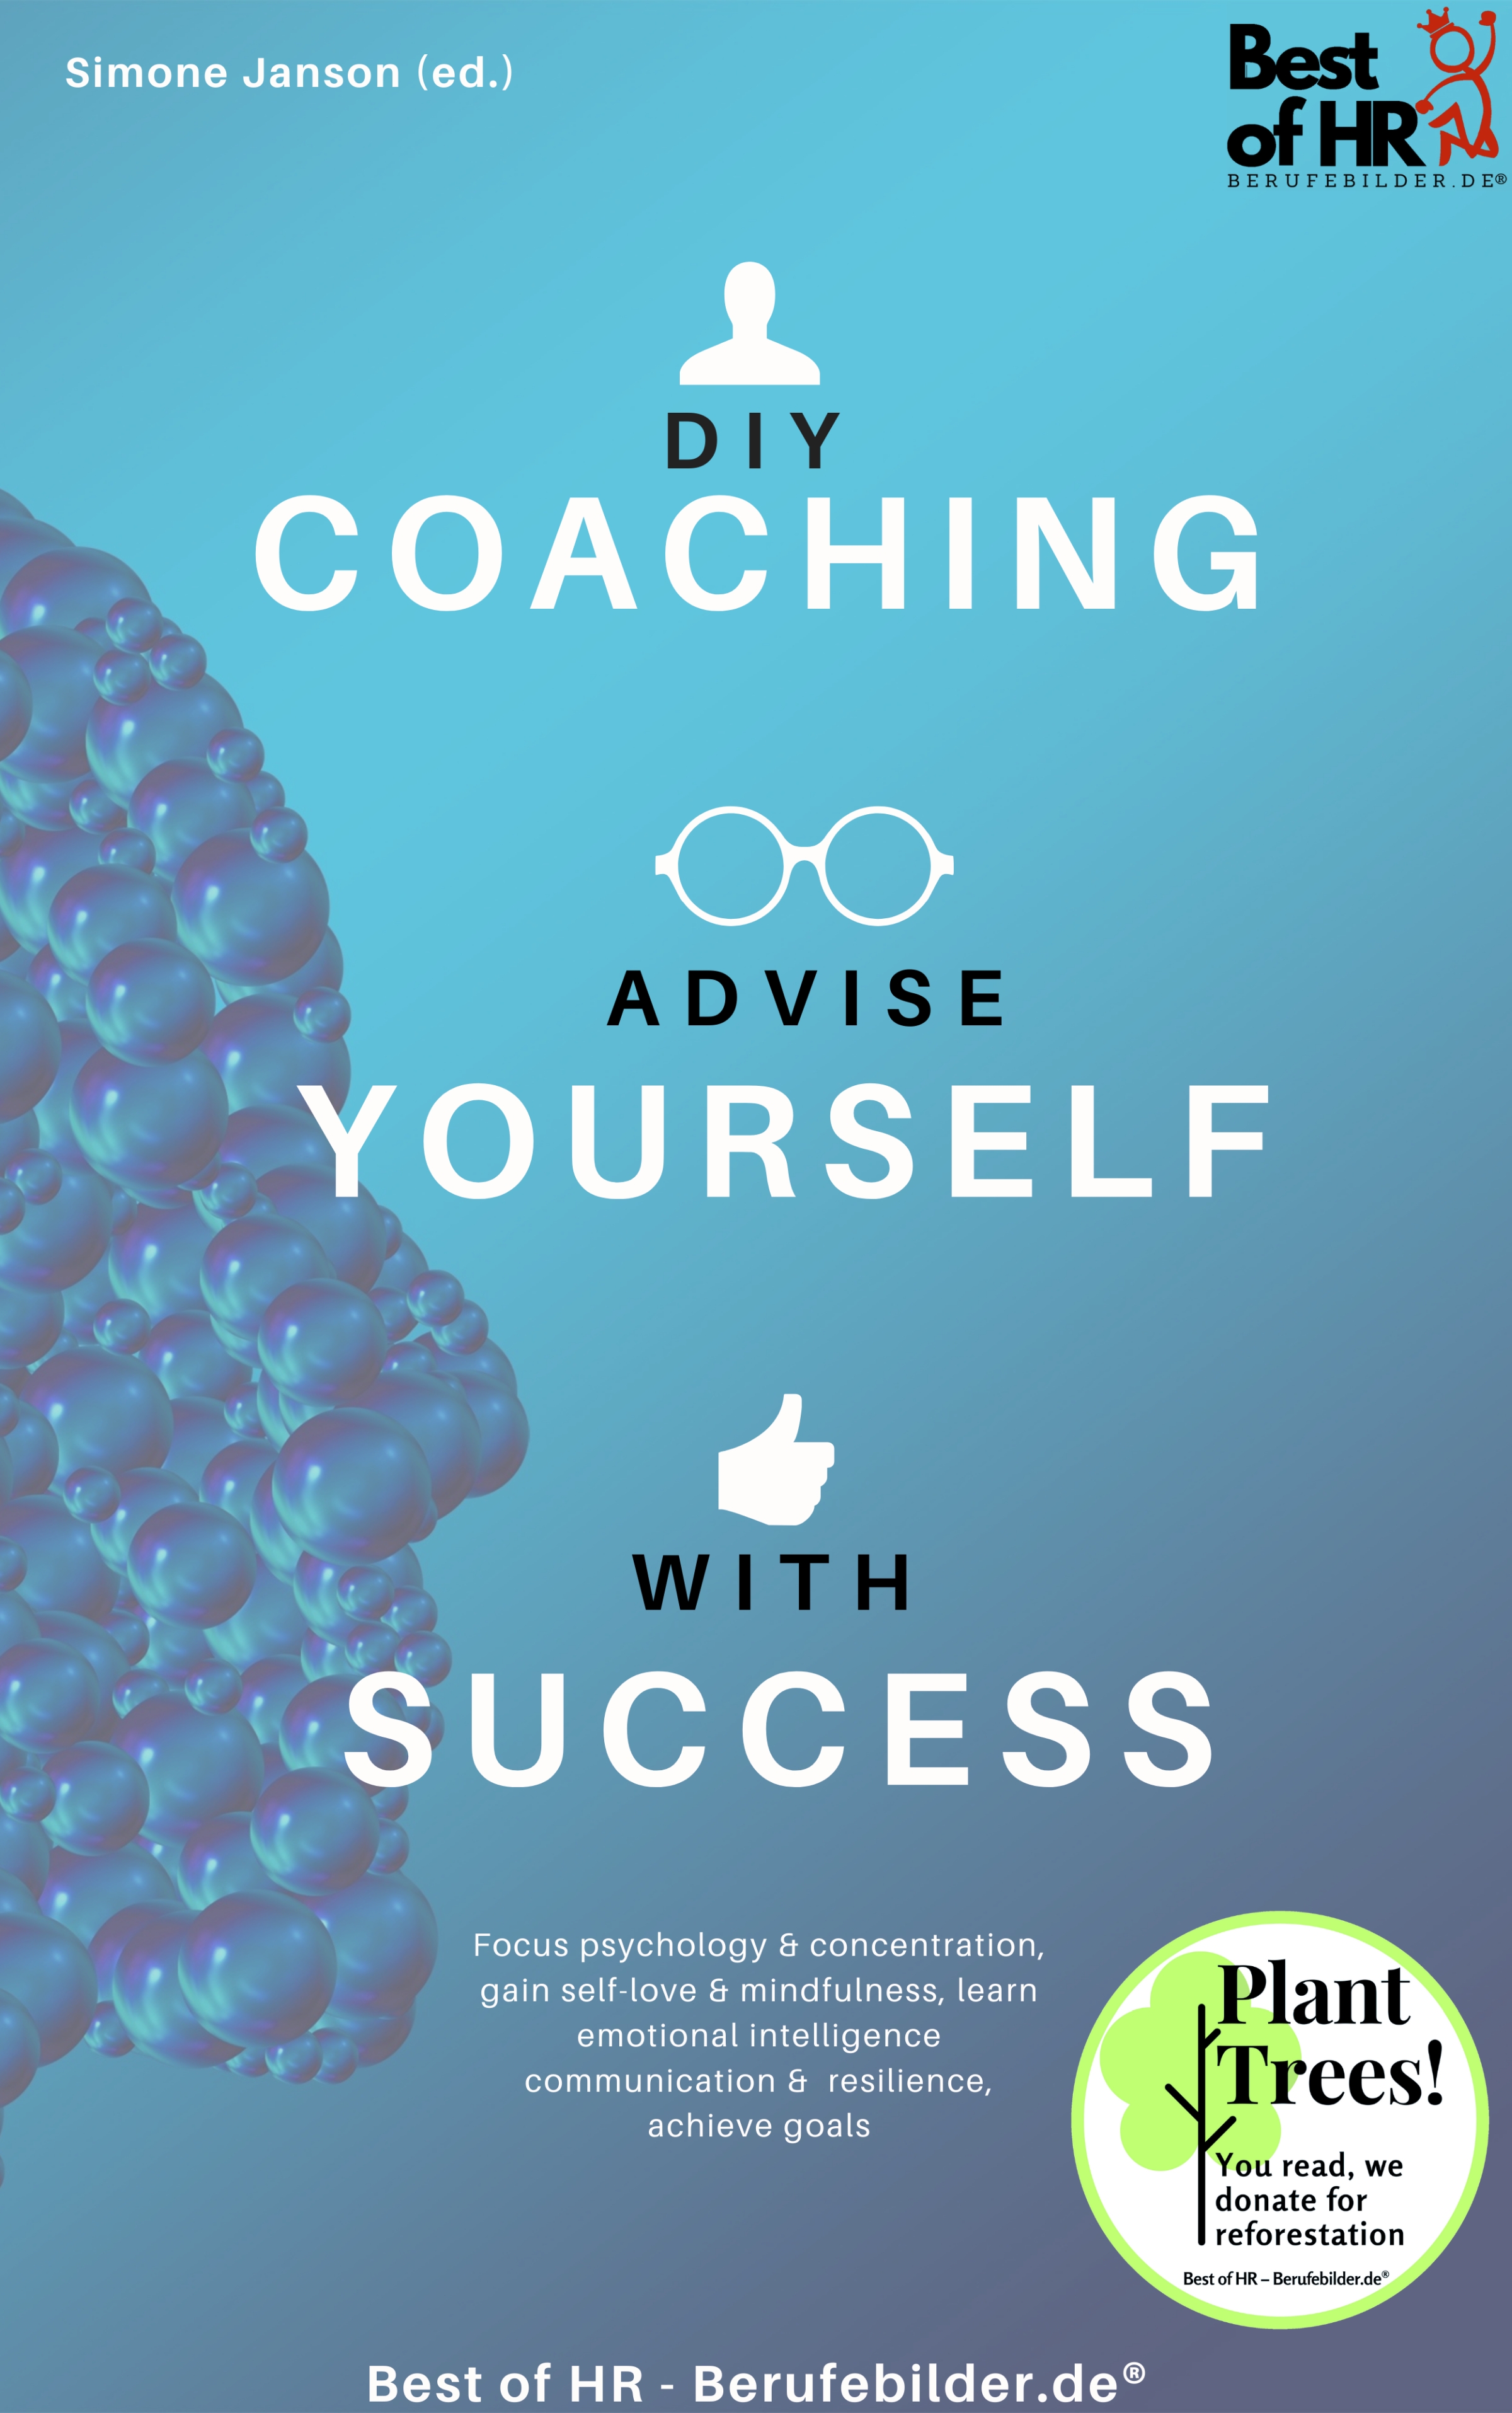 DIY-Coaching - Advise yourself with Success